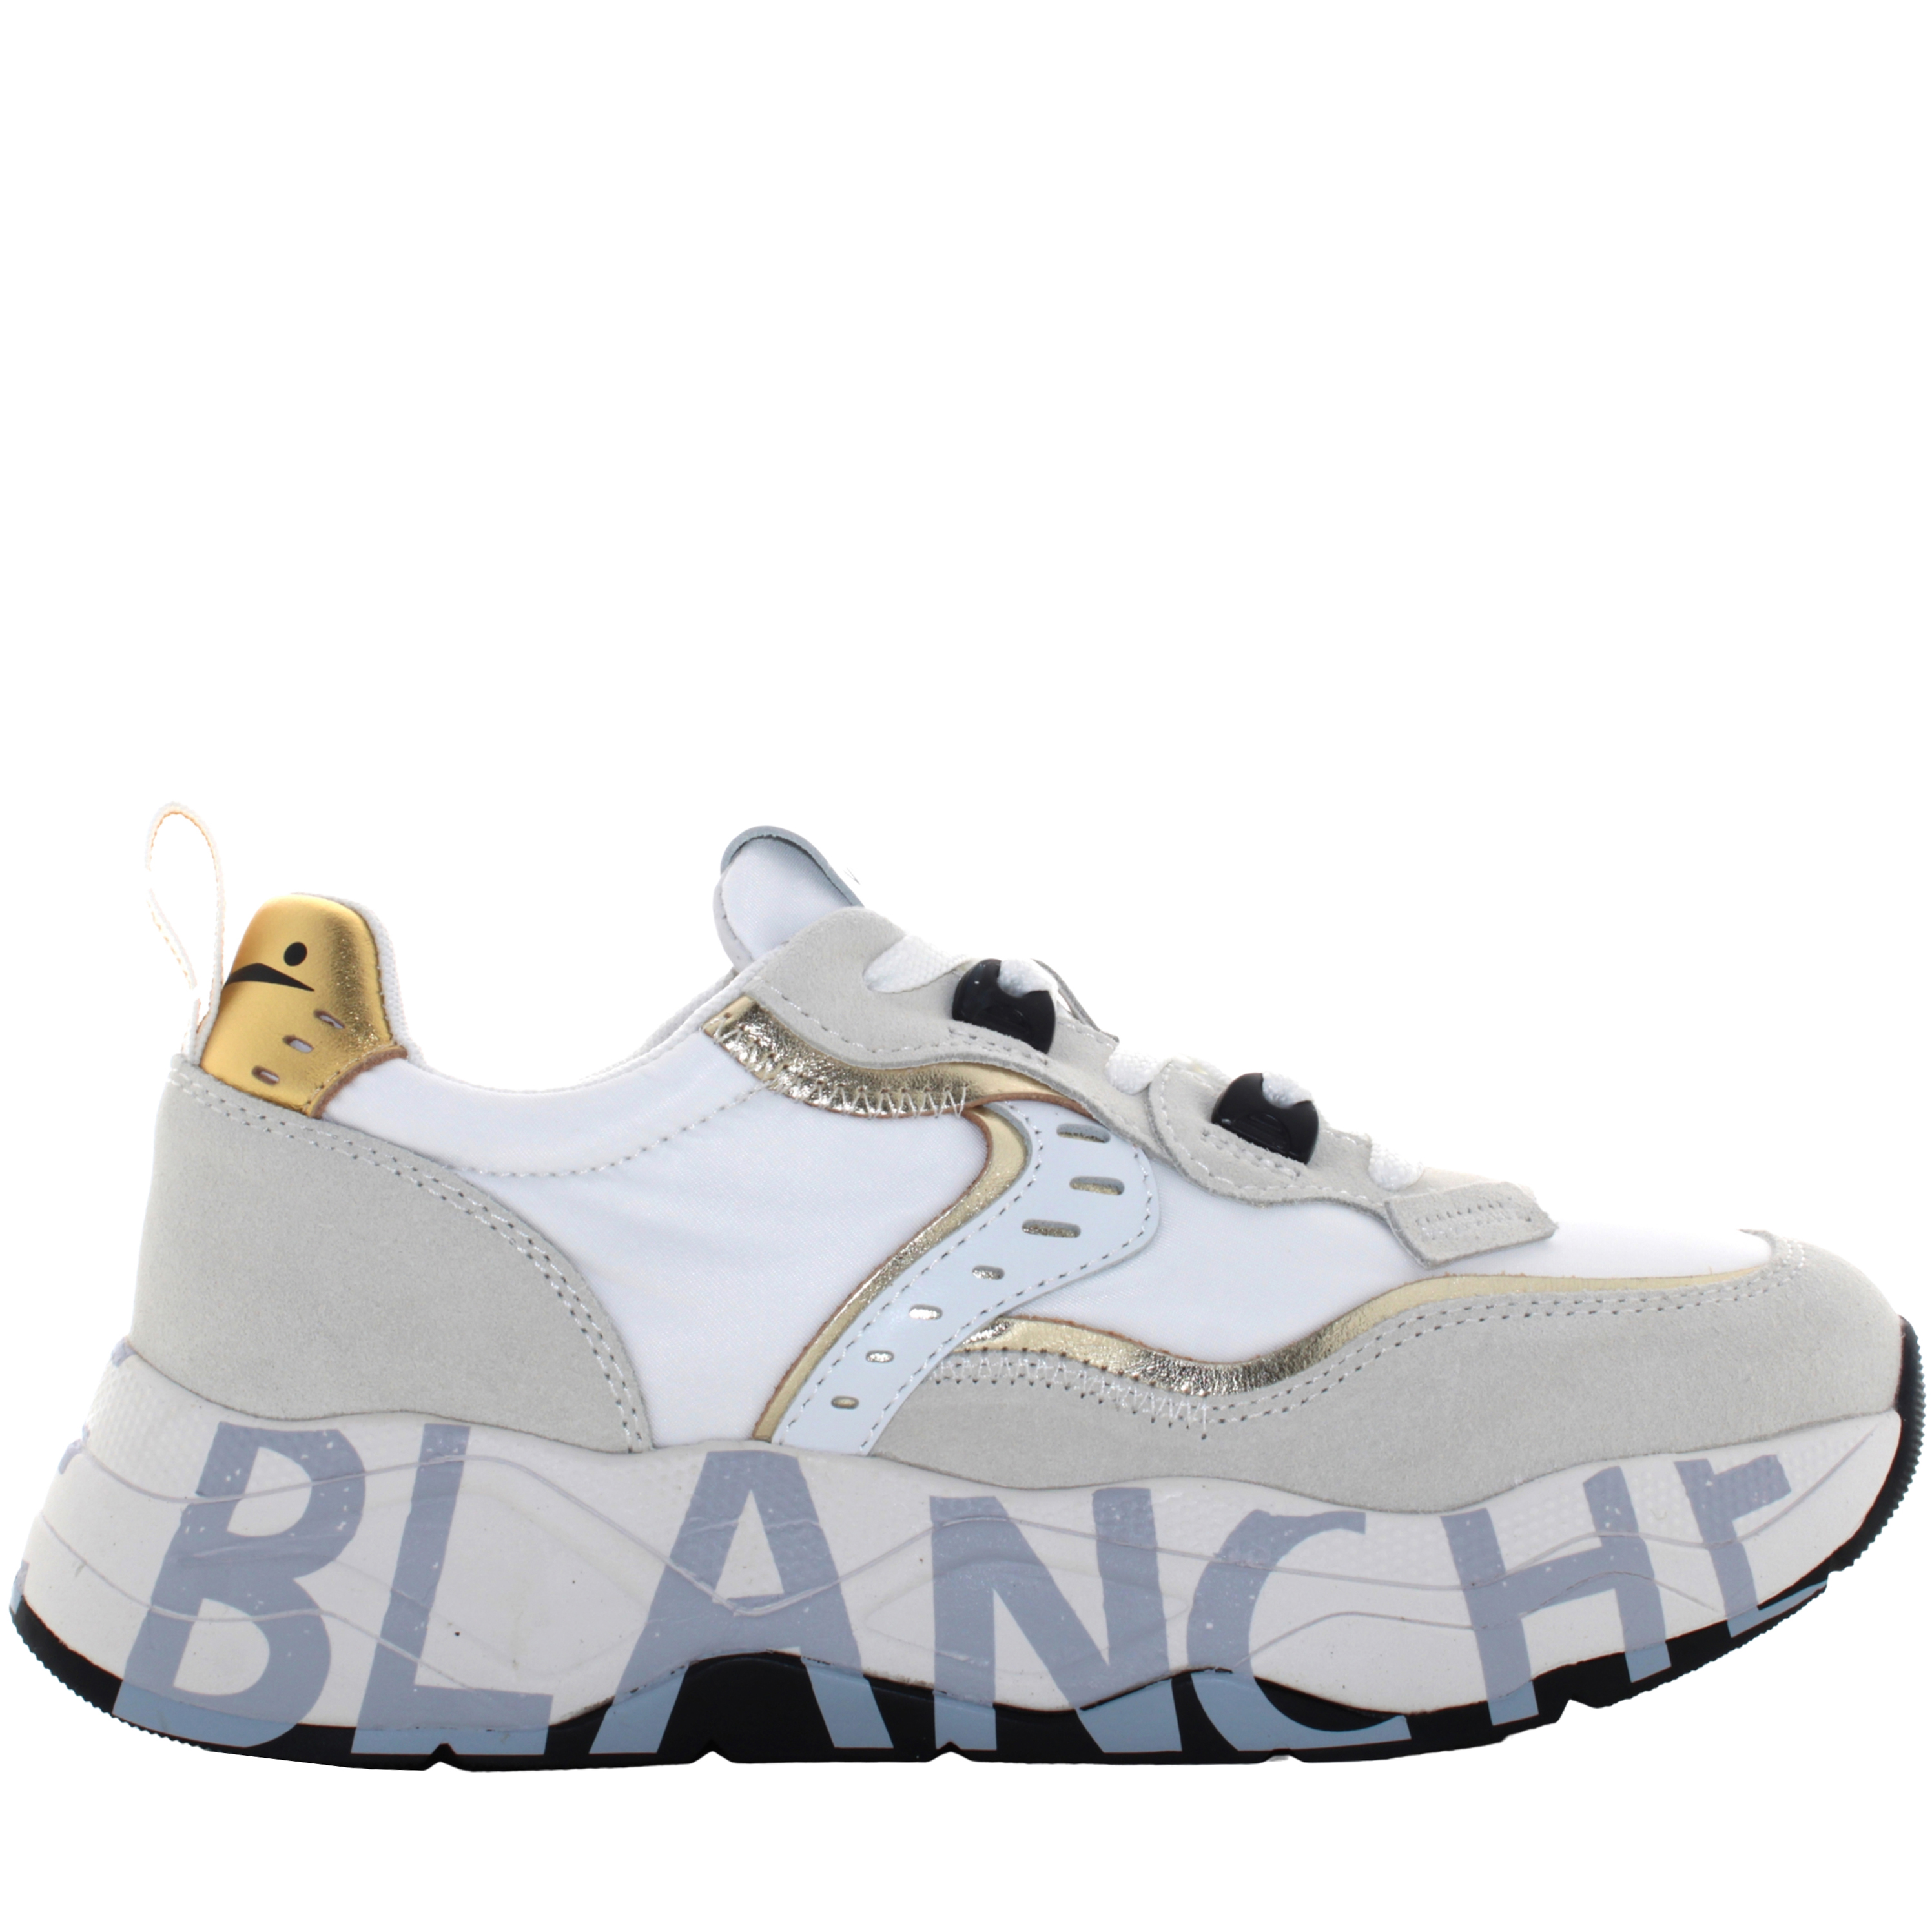 Voile Blanche donna sneakers basse 0012017475.08.1N03 CLUB105 P24